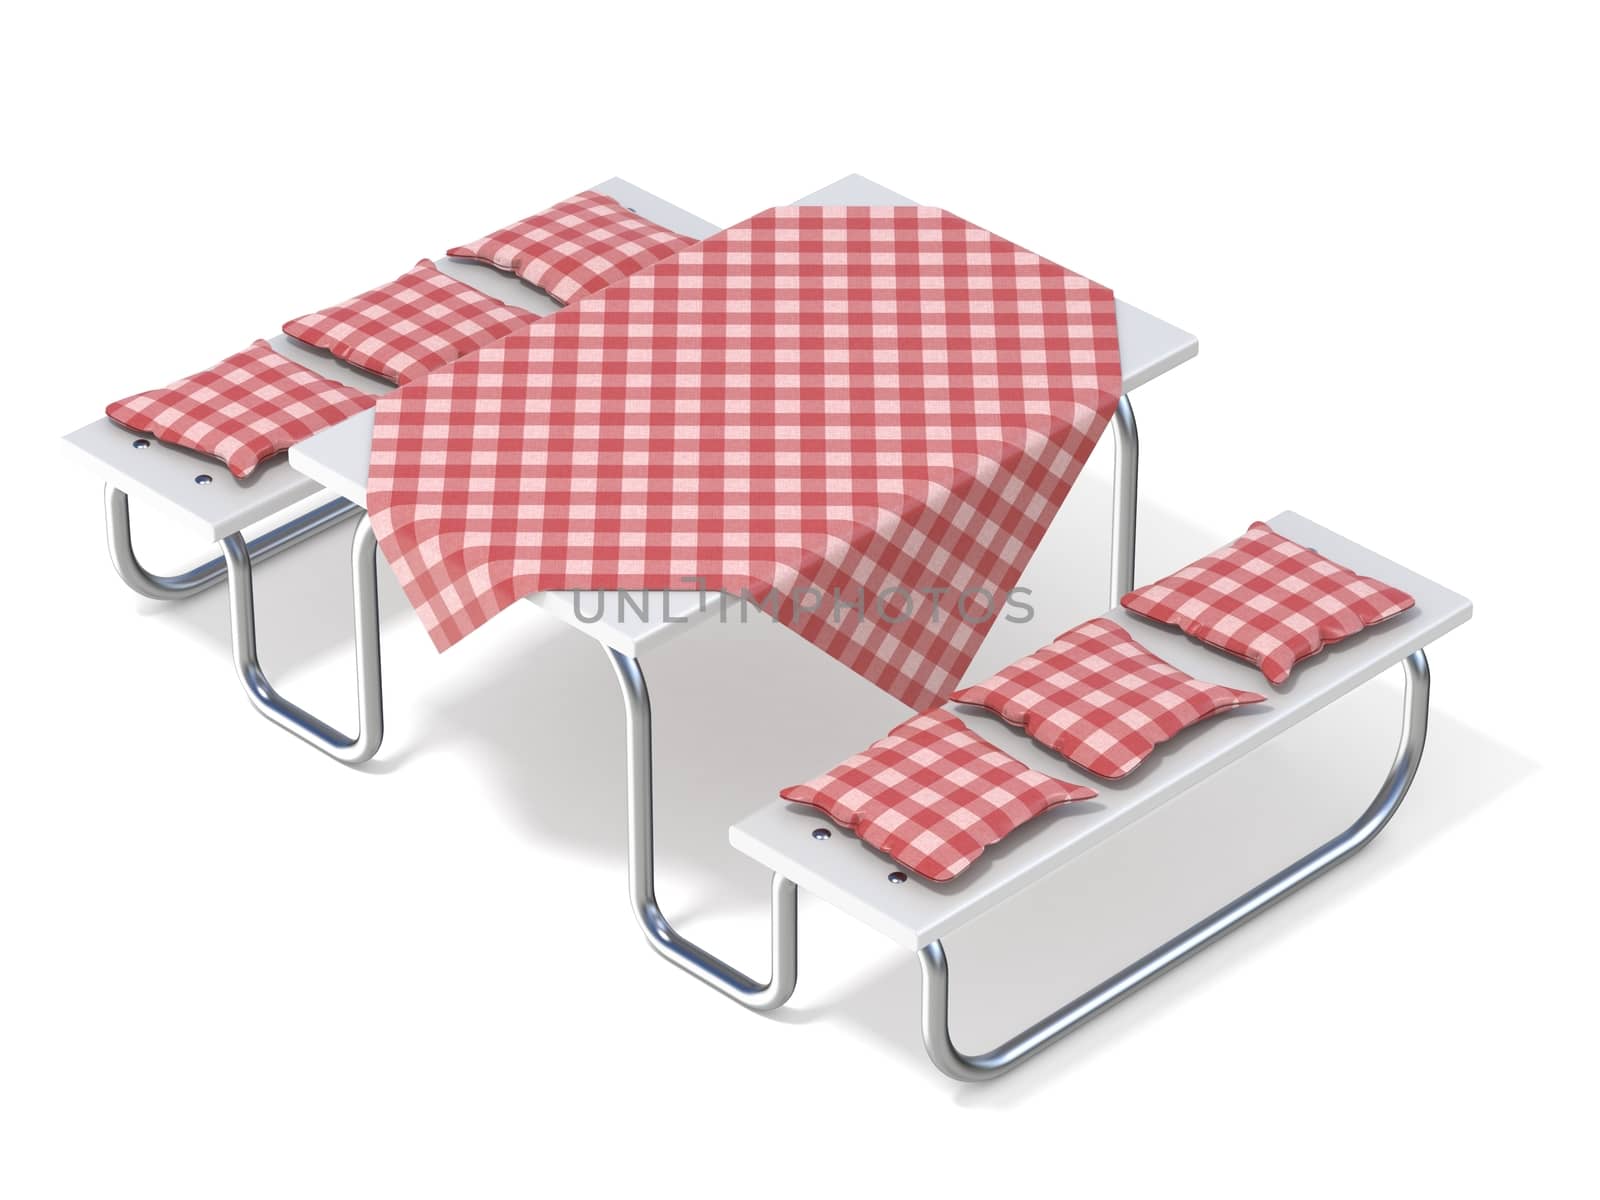 Picnic table with red table cover and pillows. 3D by djmilic